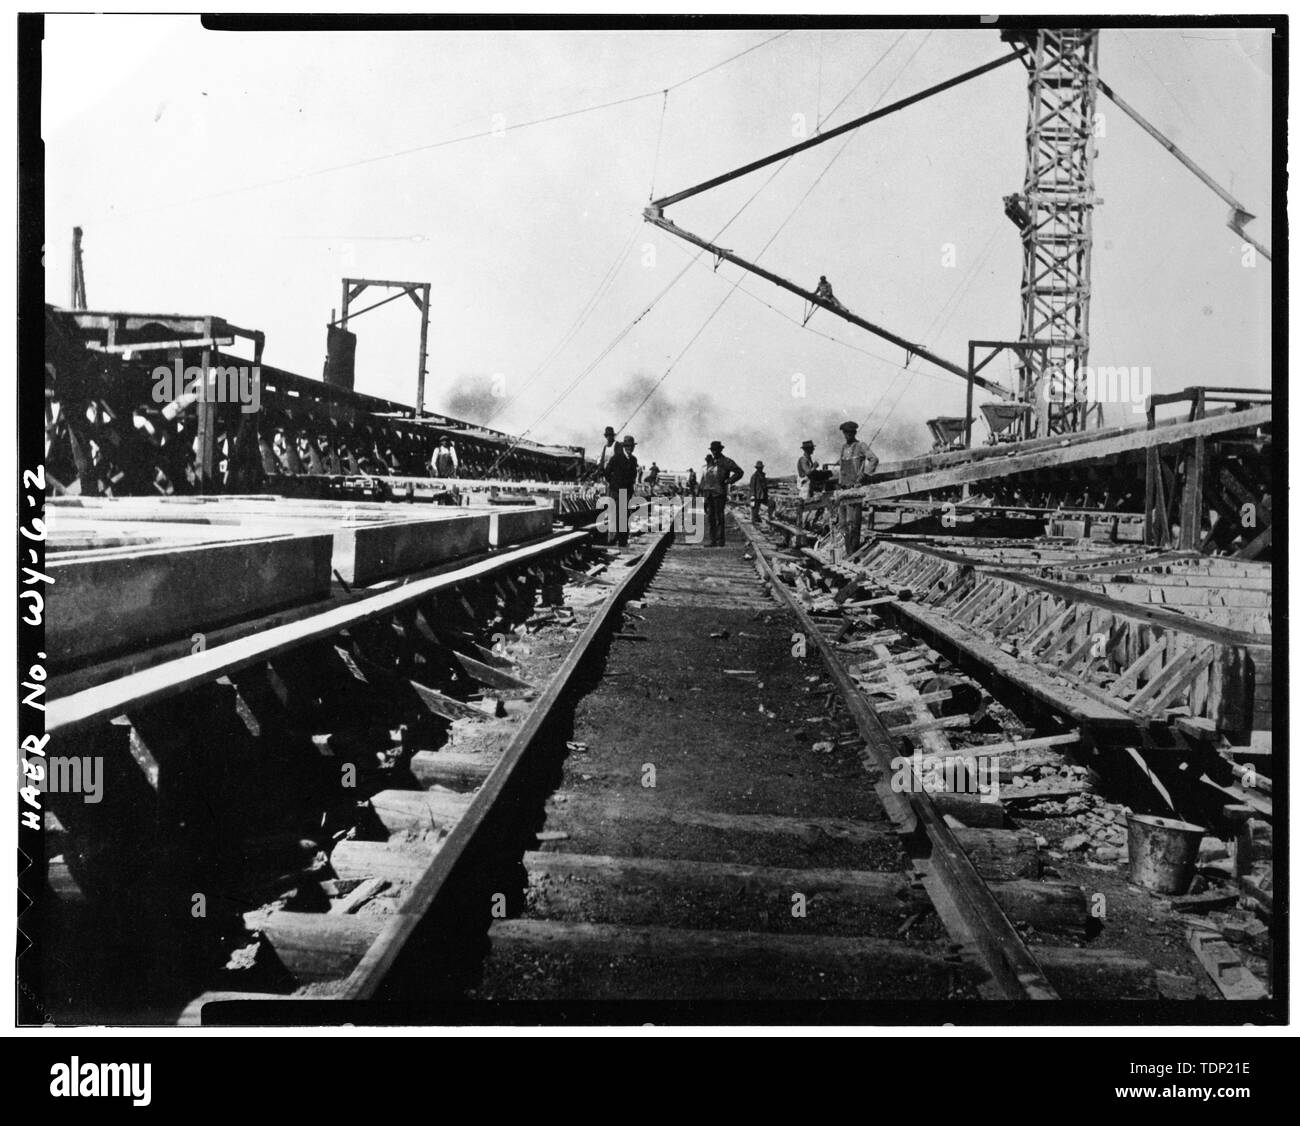 Photocopy of historic photograph of construction plant in operation, ca. 1917-19. From the Joseph E. Stimson Collection, Wyoming State Archives Museum and Historical Department. VIEW BETWEEN TRESTLES 5 AND 6, LOOKING SOUTH - Rock River Union Pacific Snowshed Plant, .6 Mile North of Rock River, Rock River, Albany County, WY; Union Pacific Transcontinental Railroad; Wyoming State Highway Department Stock Photo